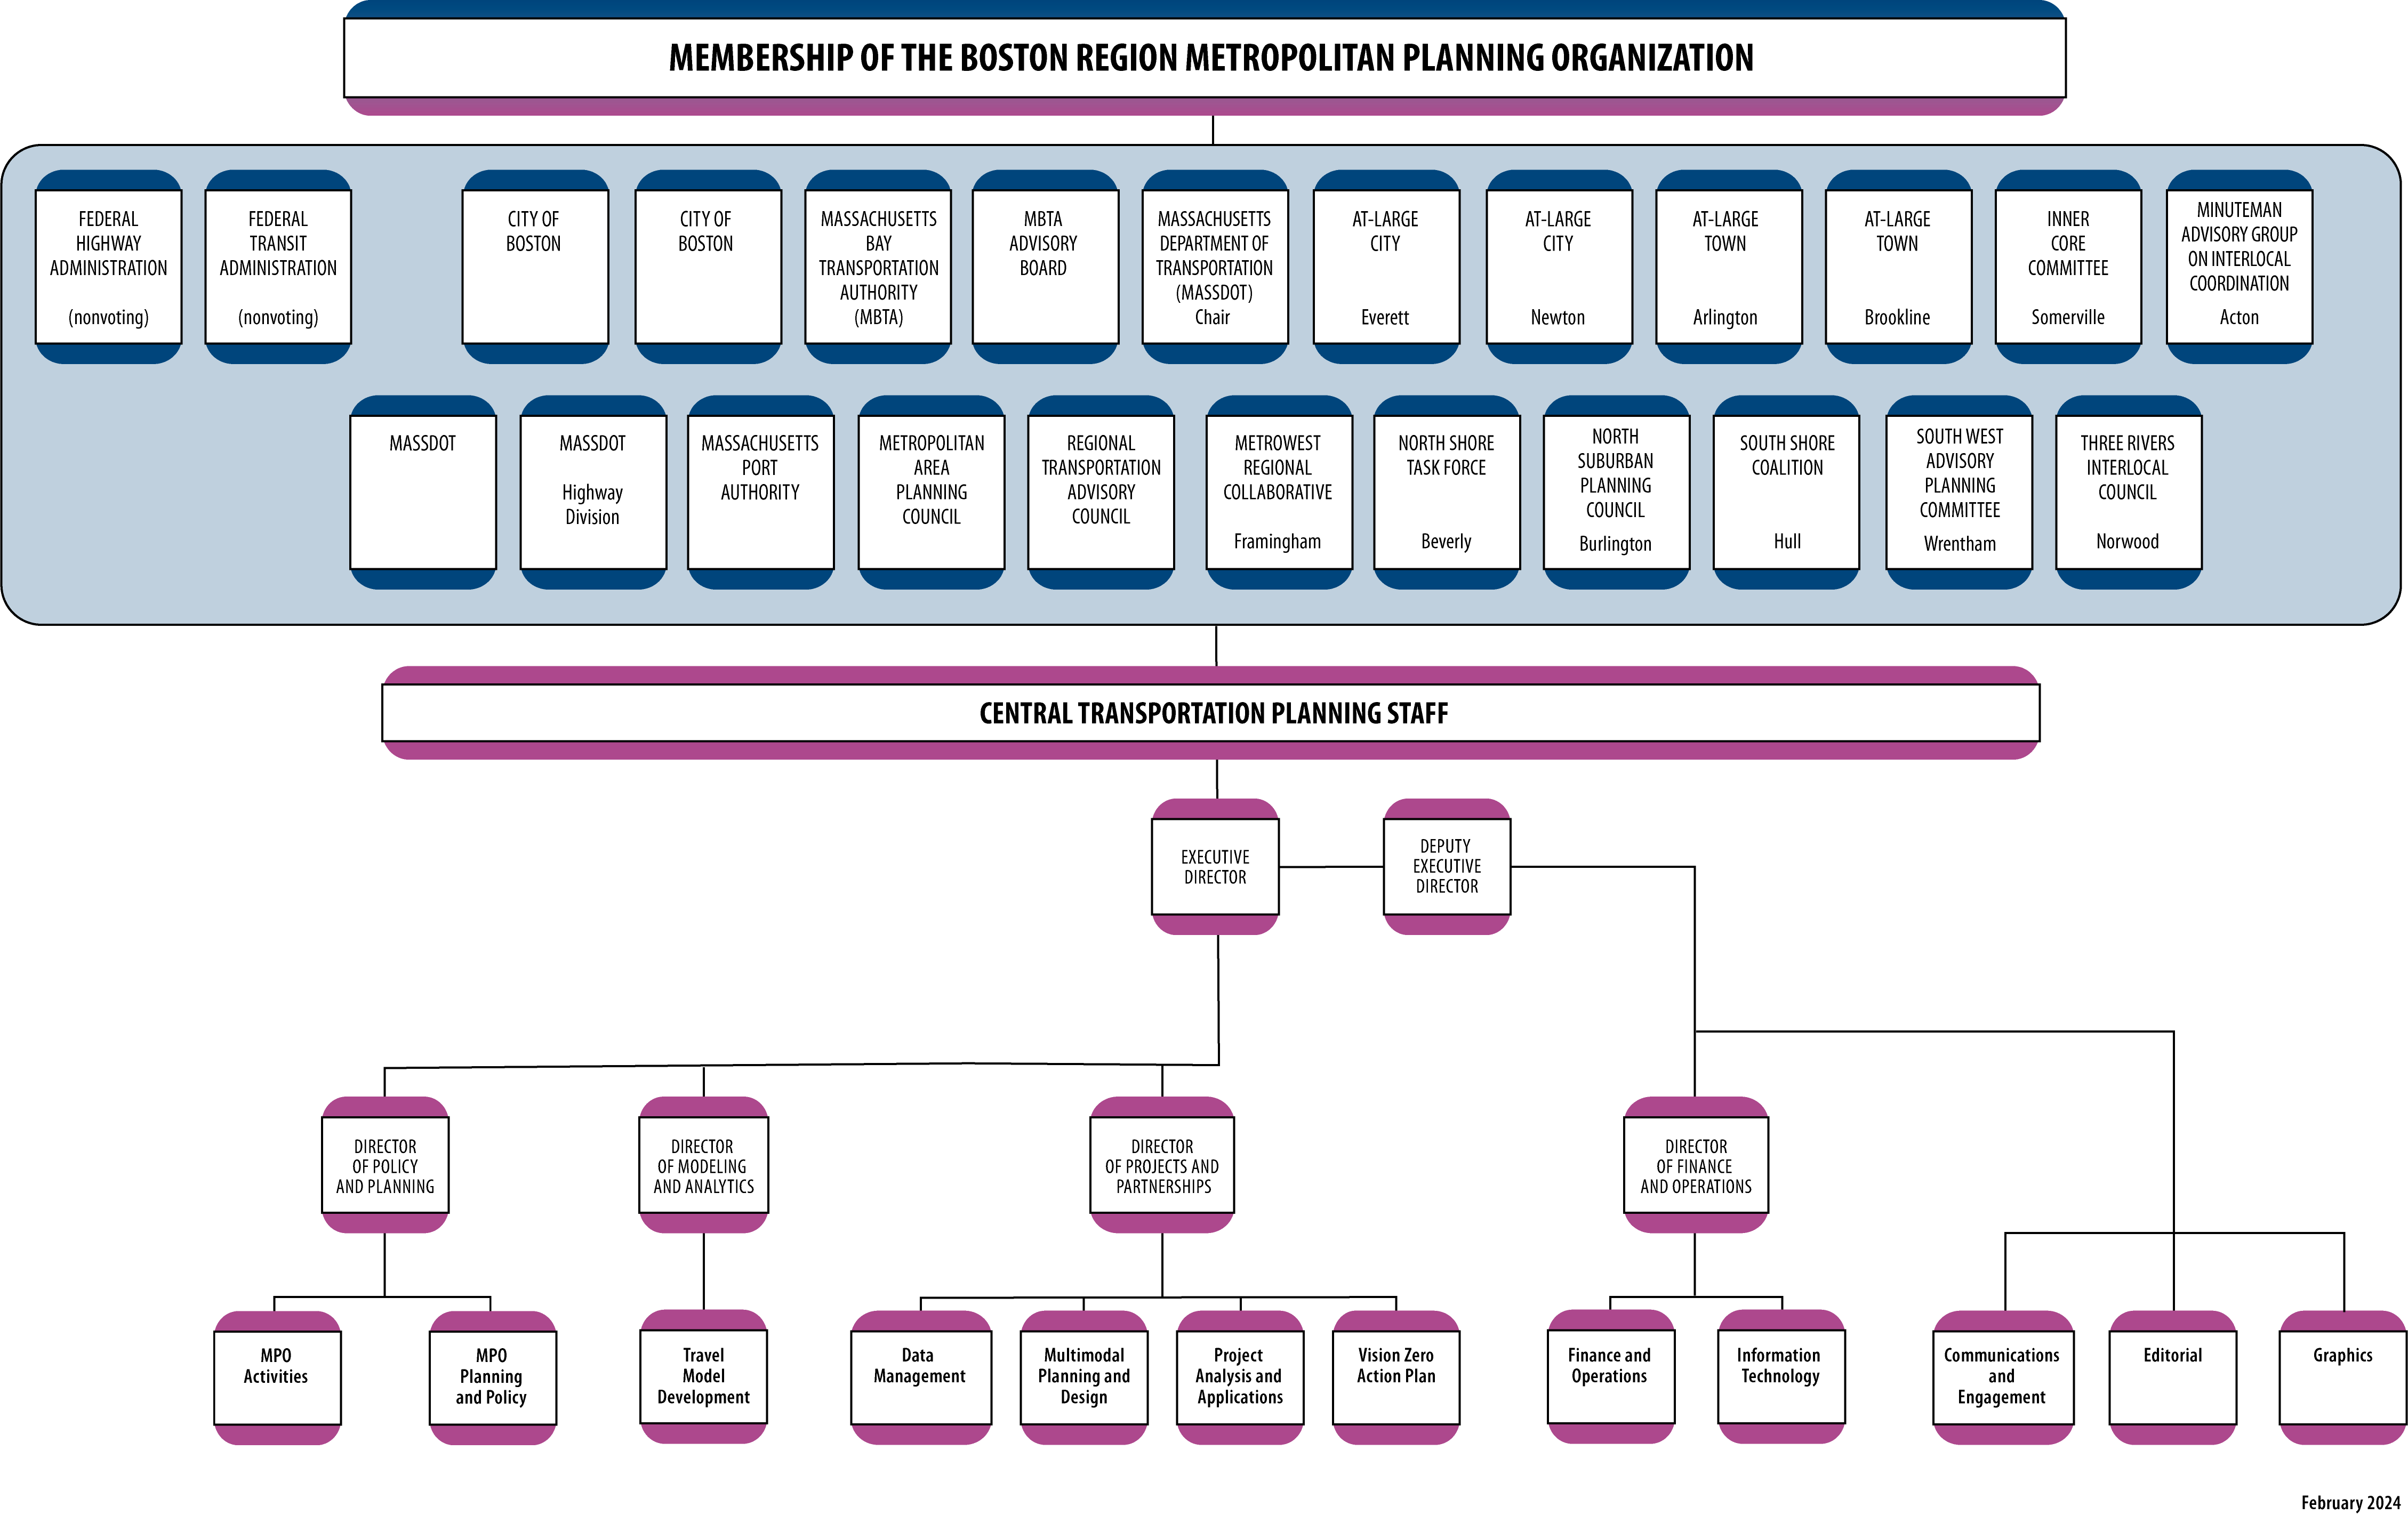 Organizational chart showing the Membership of the Boston Region MPO and the Central Transportation Planning Staff (CTPS) staff.